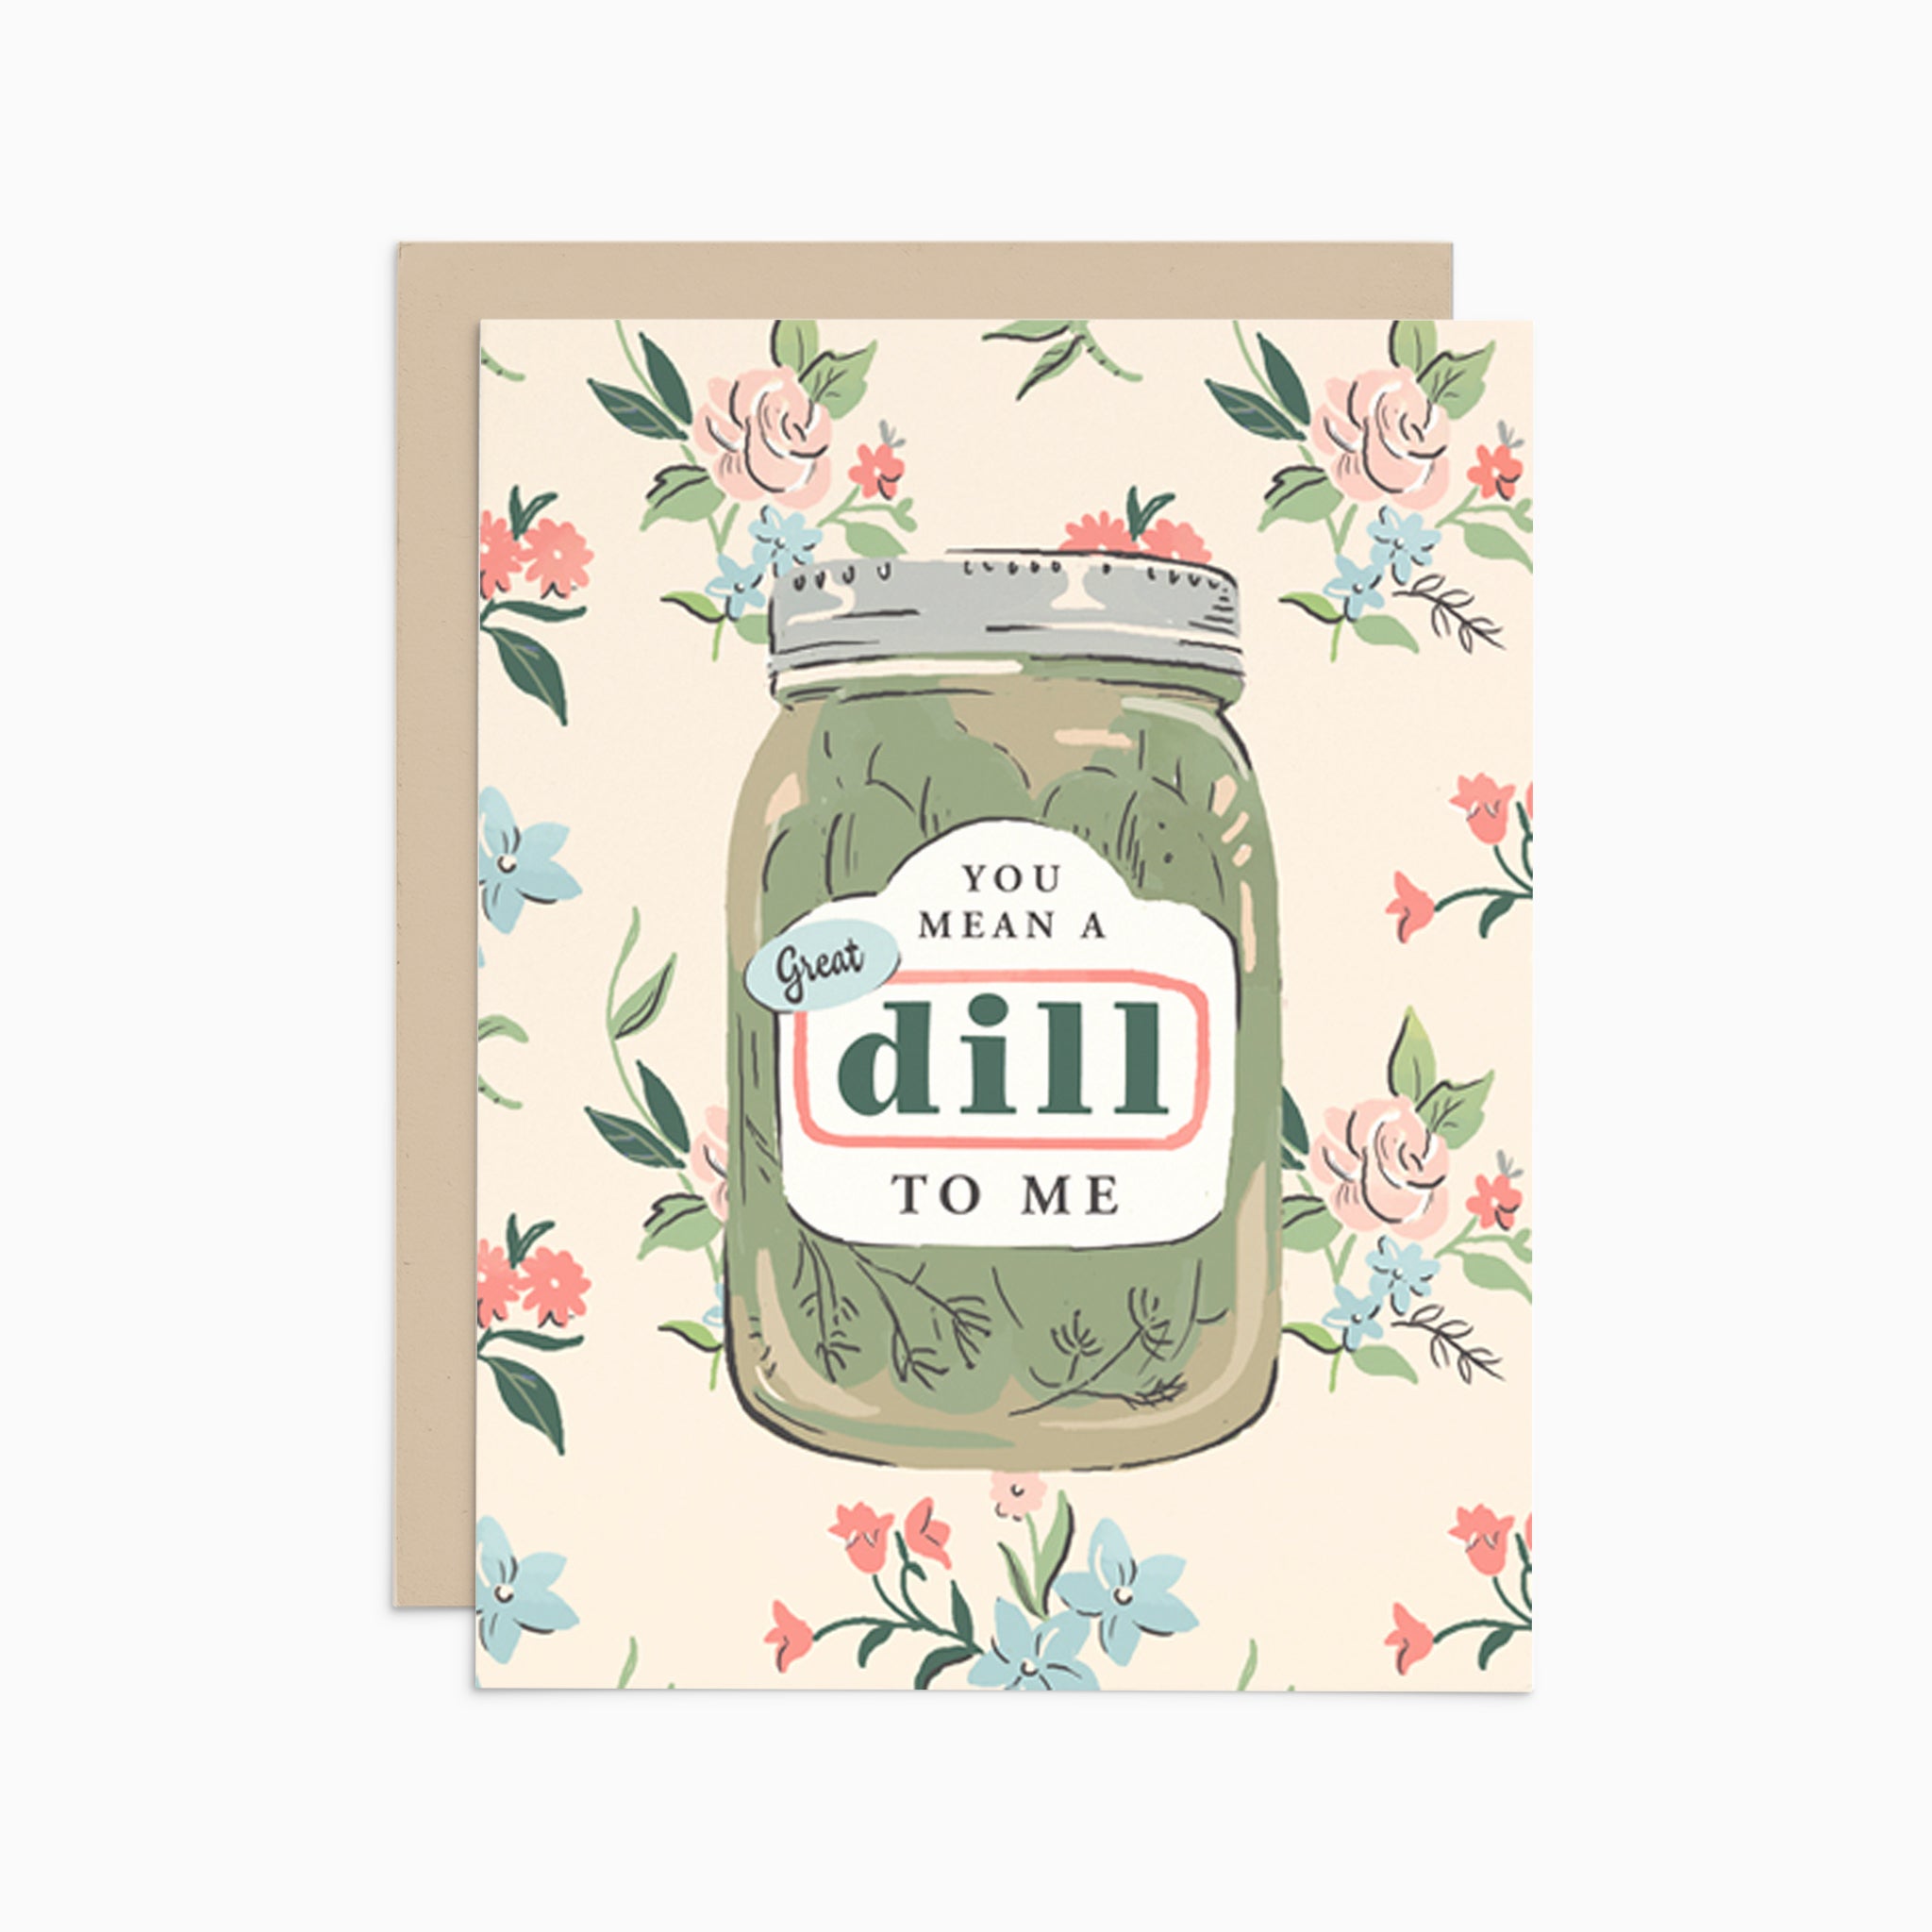 Illustrated greeting card featuring a pickle jar with the label 'You Mean a Great Dill to Me' set against a floral background.